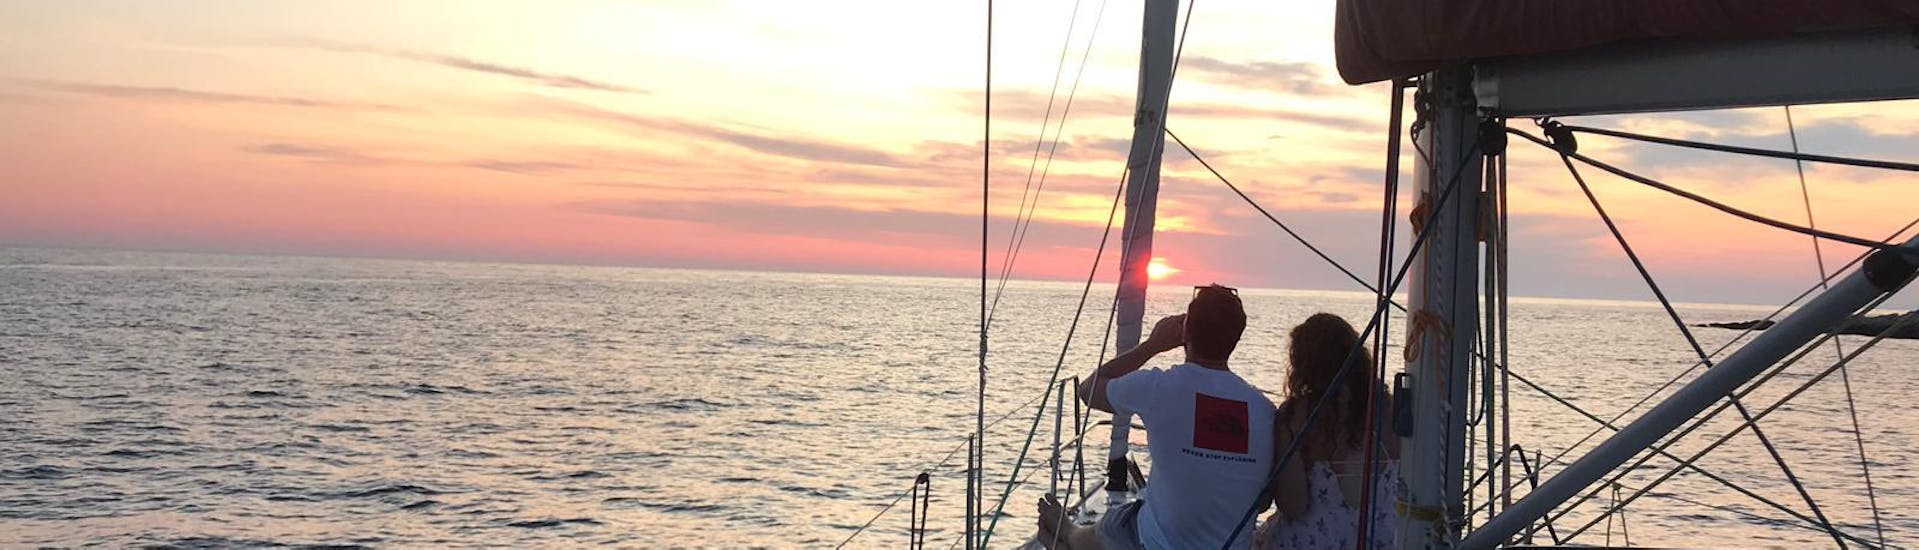 People looking at the sunset during the Private Romantic Sunset Sailing Trip to Cape Pelegrin from Hvar The Day Sail.